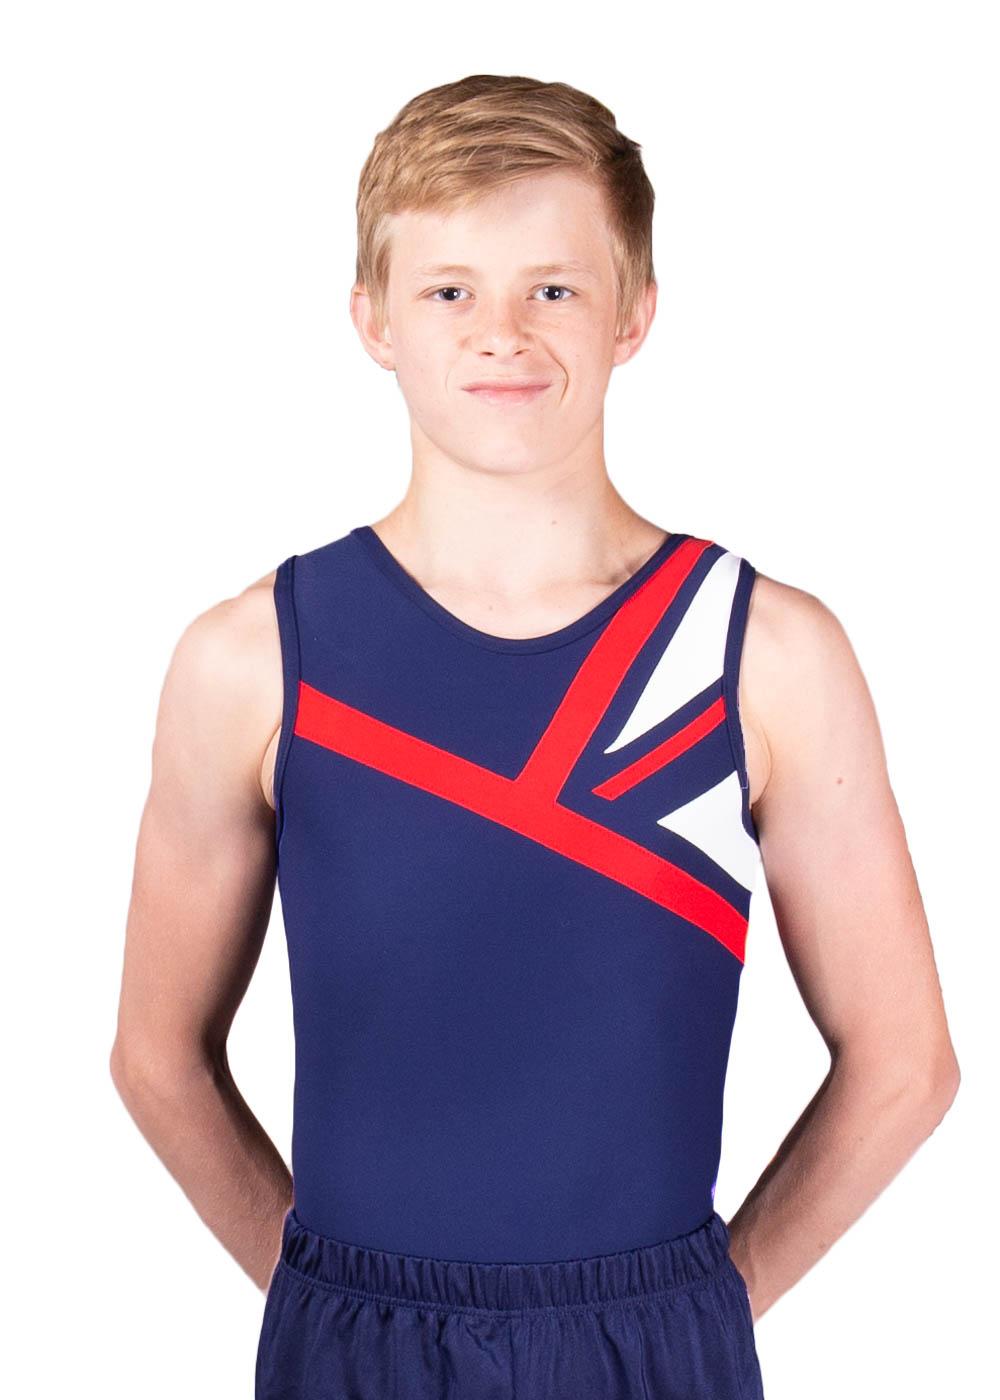 CHARLES - BVZ23:- Mens leotard in Navy, Red and White - A Star Leotards